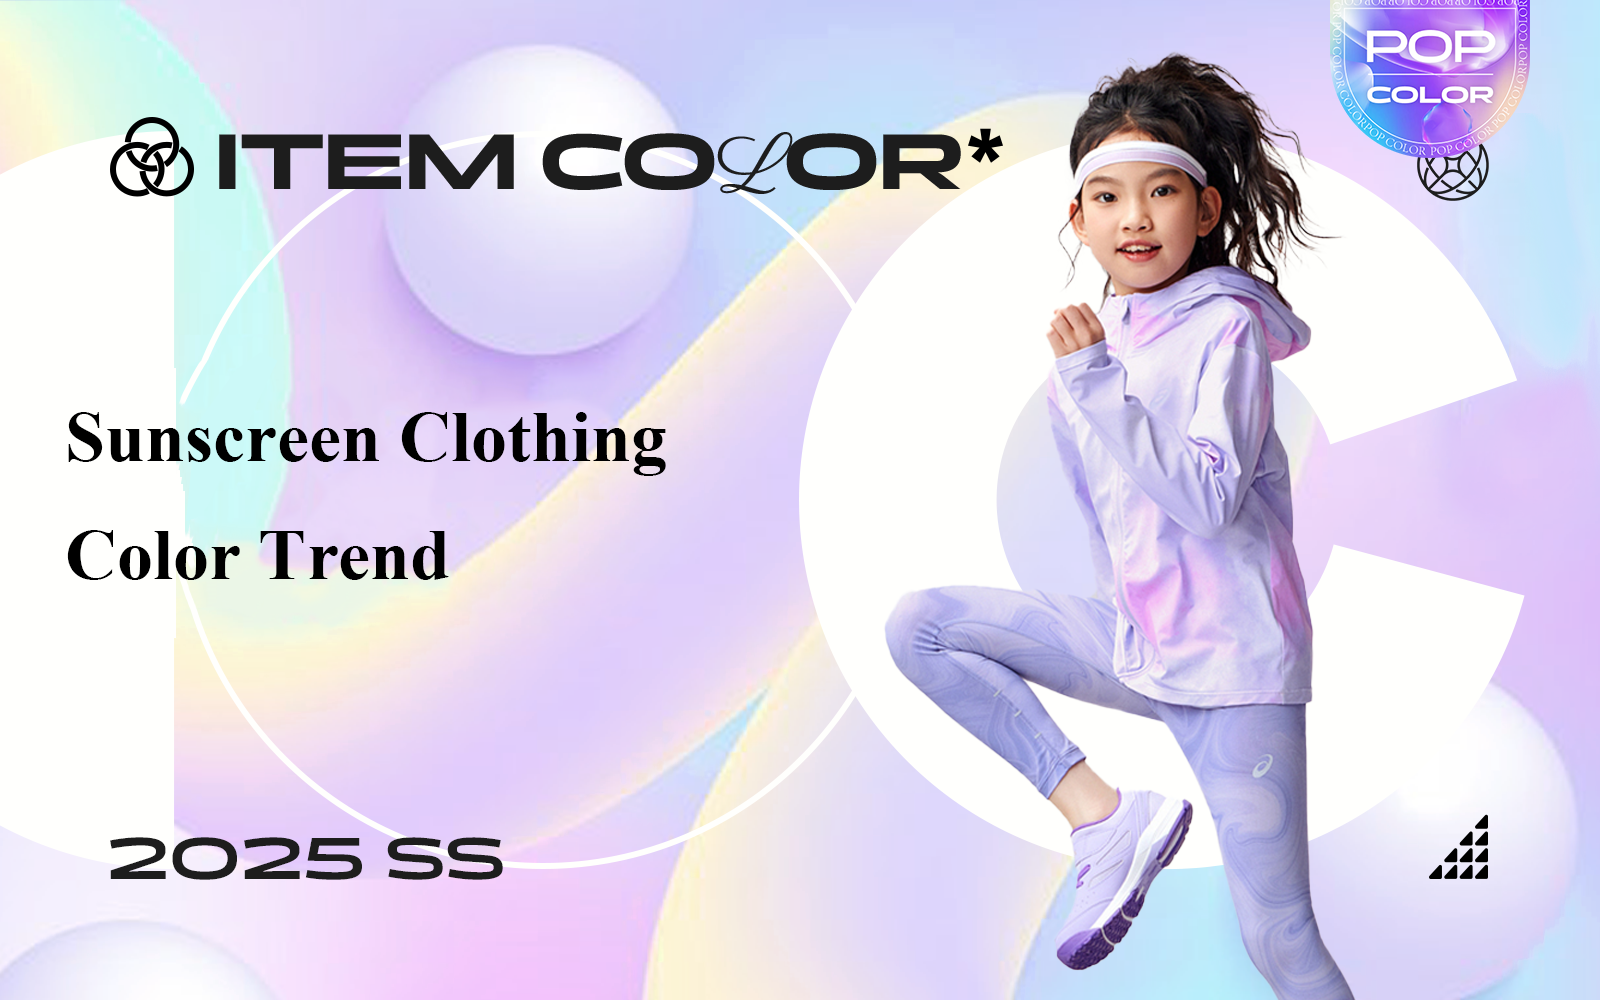 Sunscreen Clothing -- The Color Trend for Kidswear